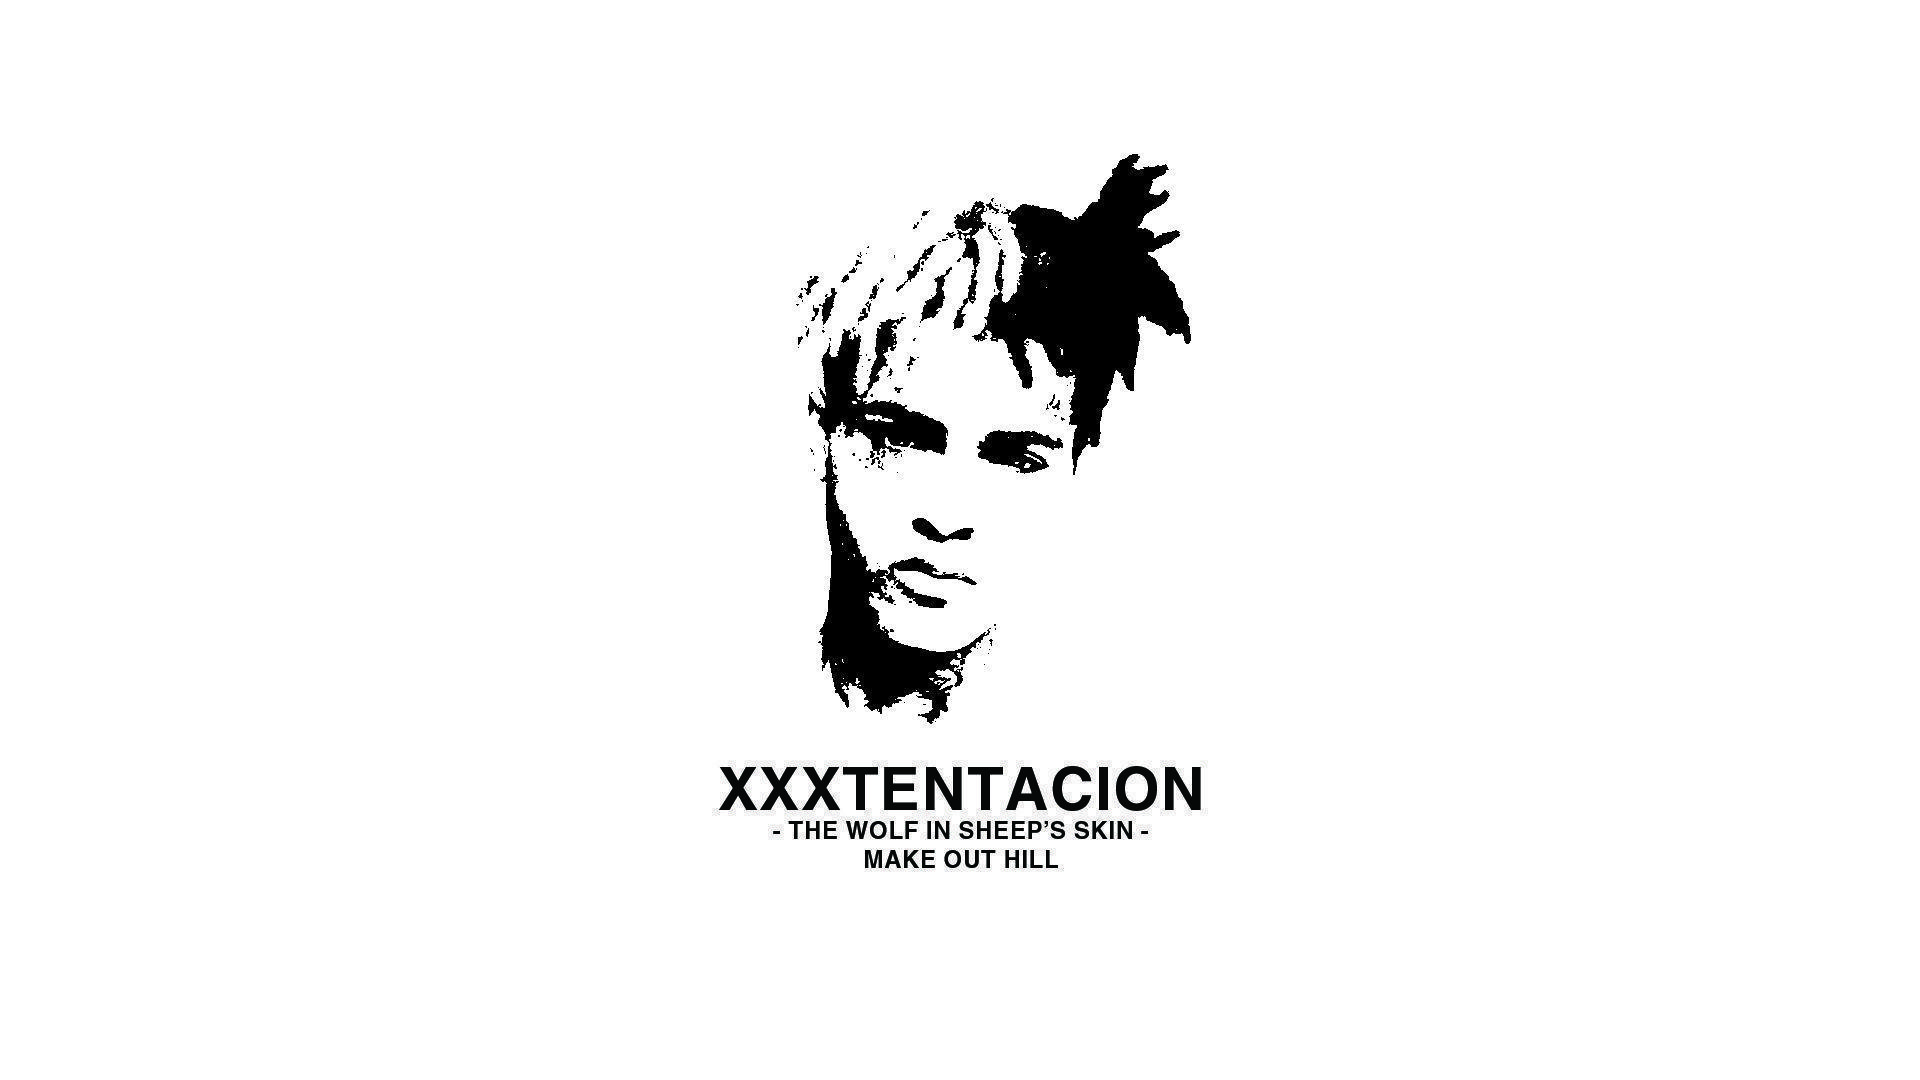 The image is a poster with an illustration of xentension - XXXTentacion